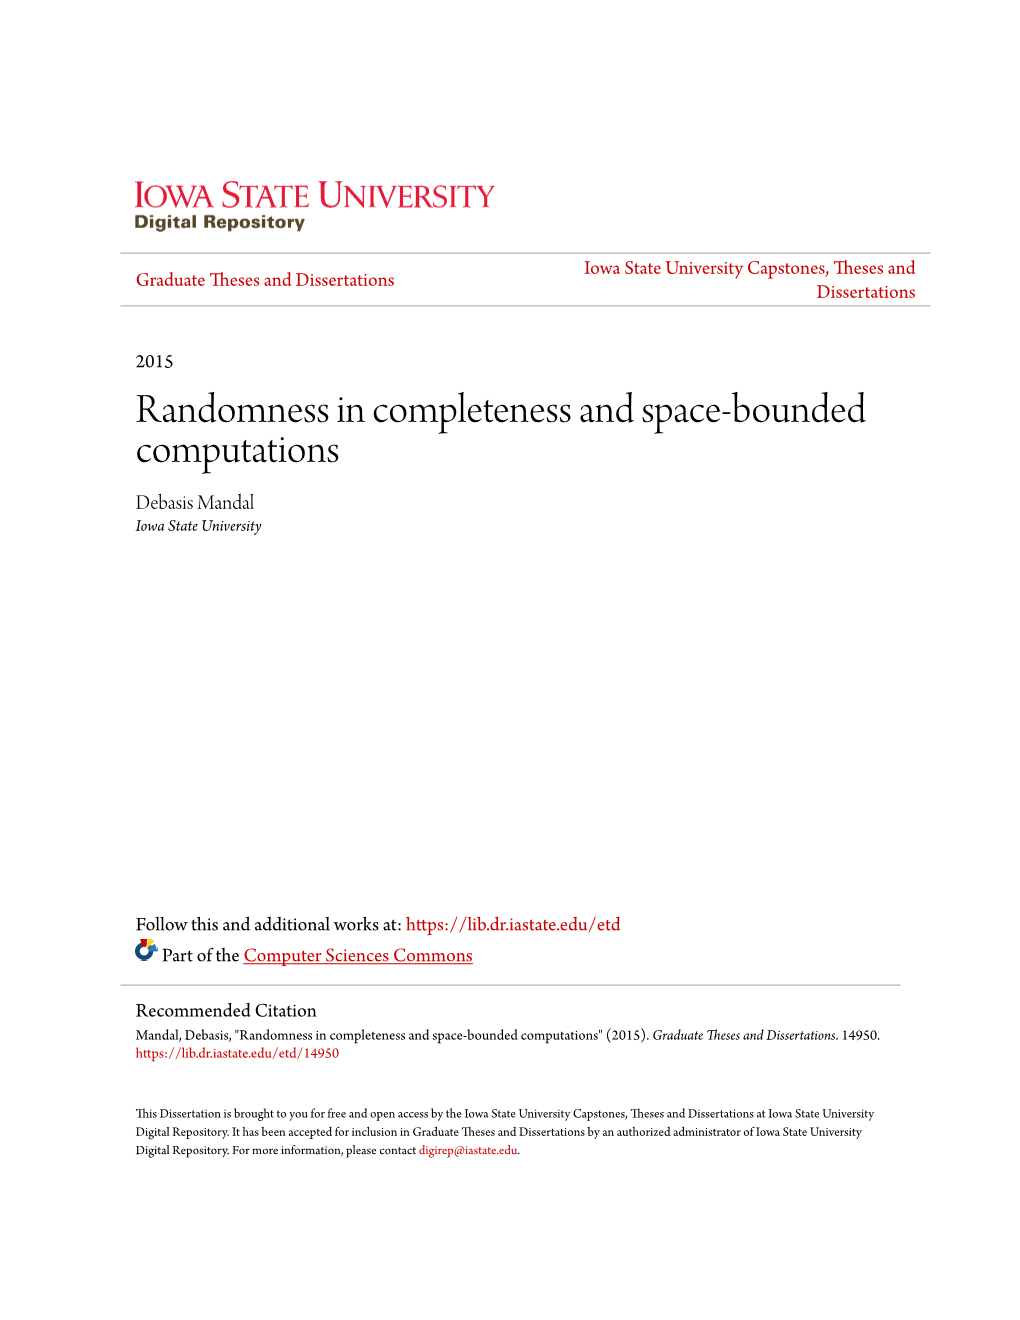 Randomness in Completeness and Space-Bounded Computations Debasis Mandal Iowa State University